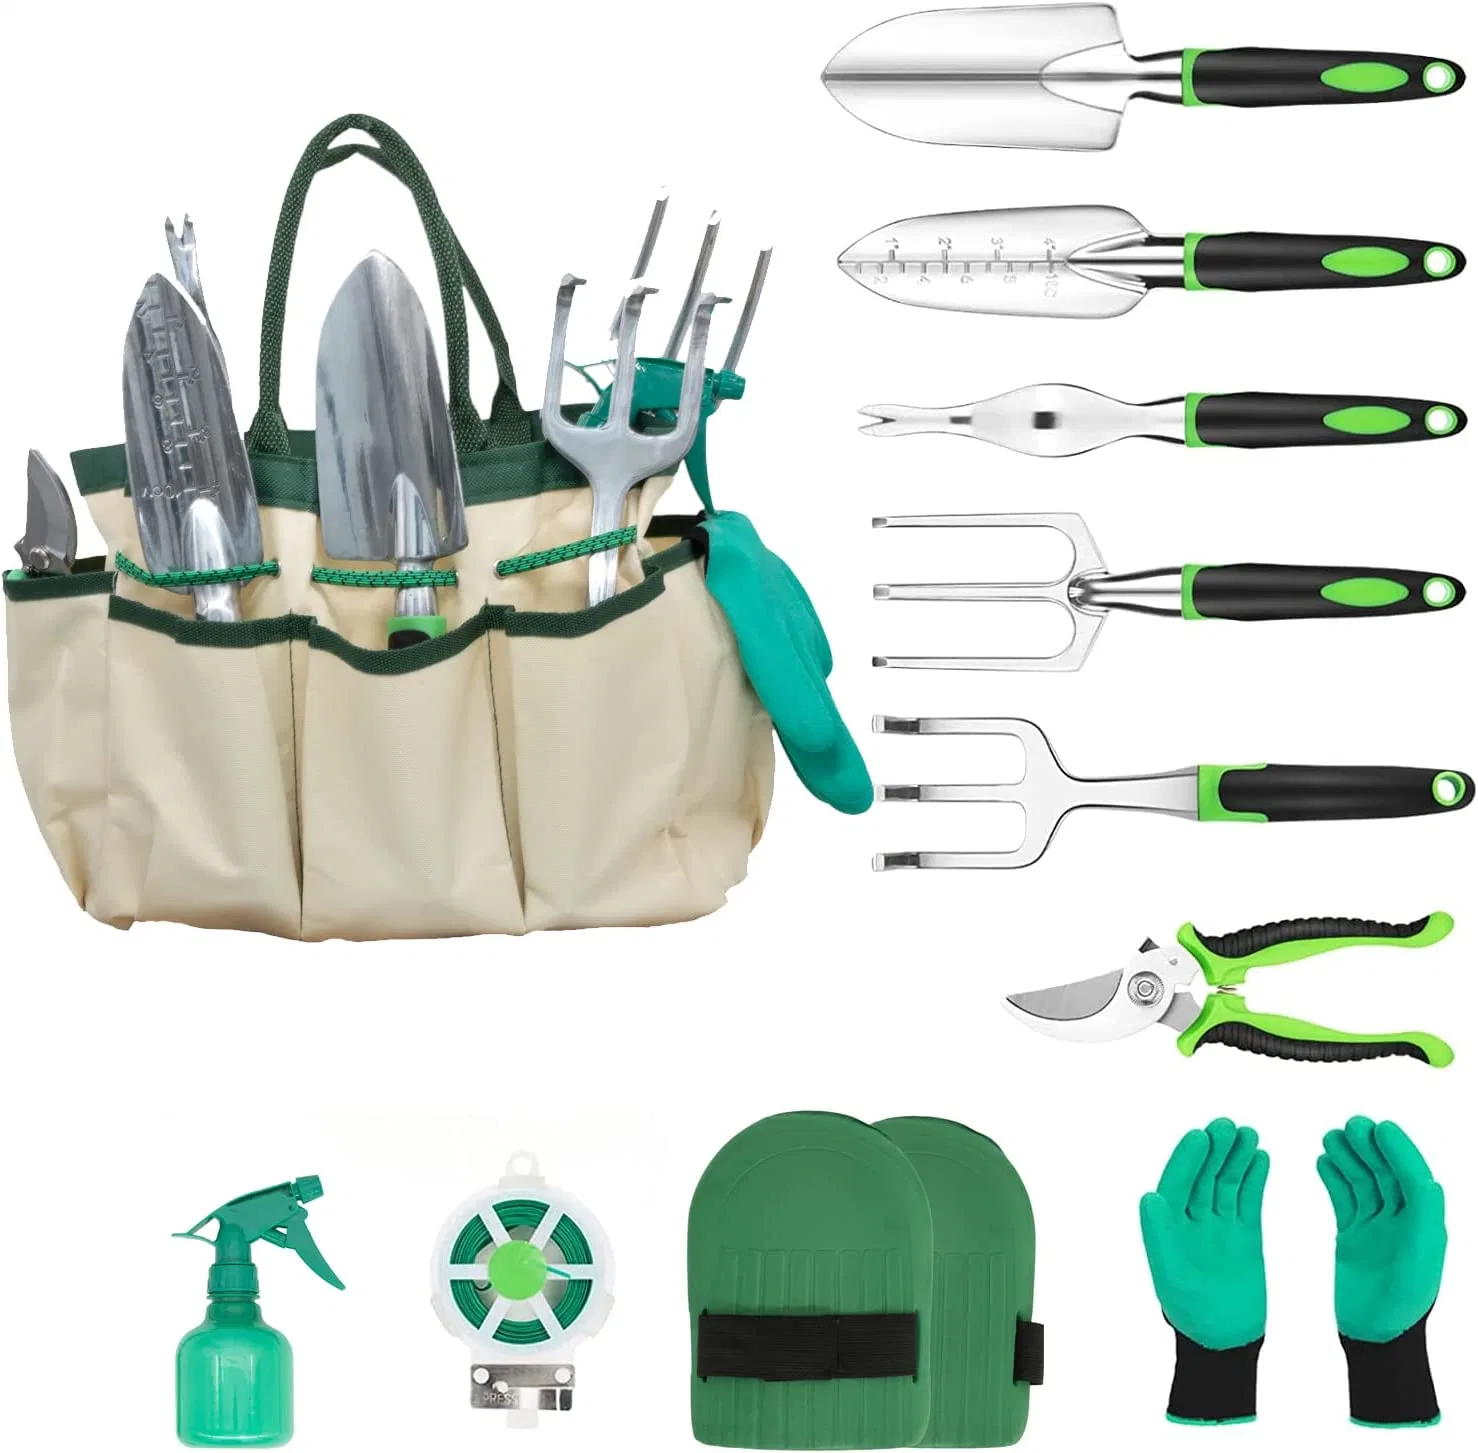 Best Garden Tools Planting Set with Various Sizes